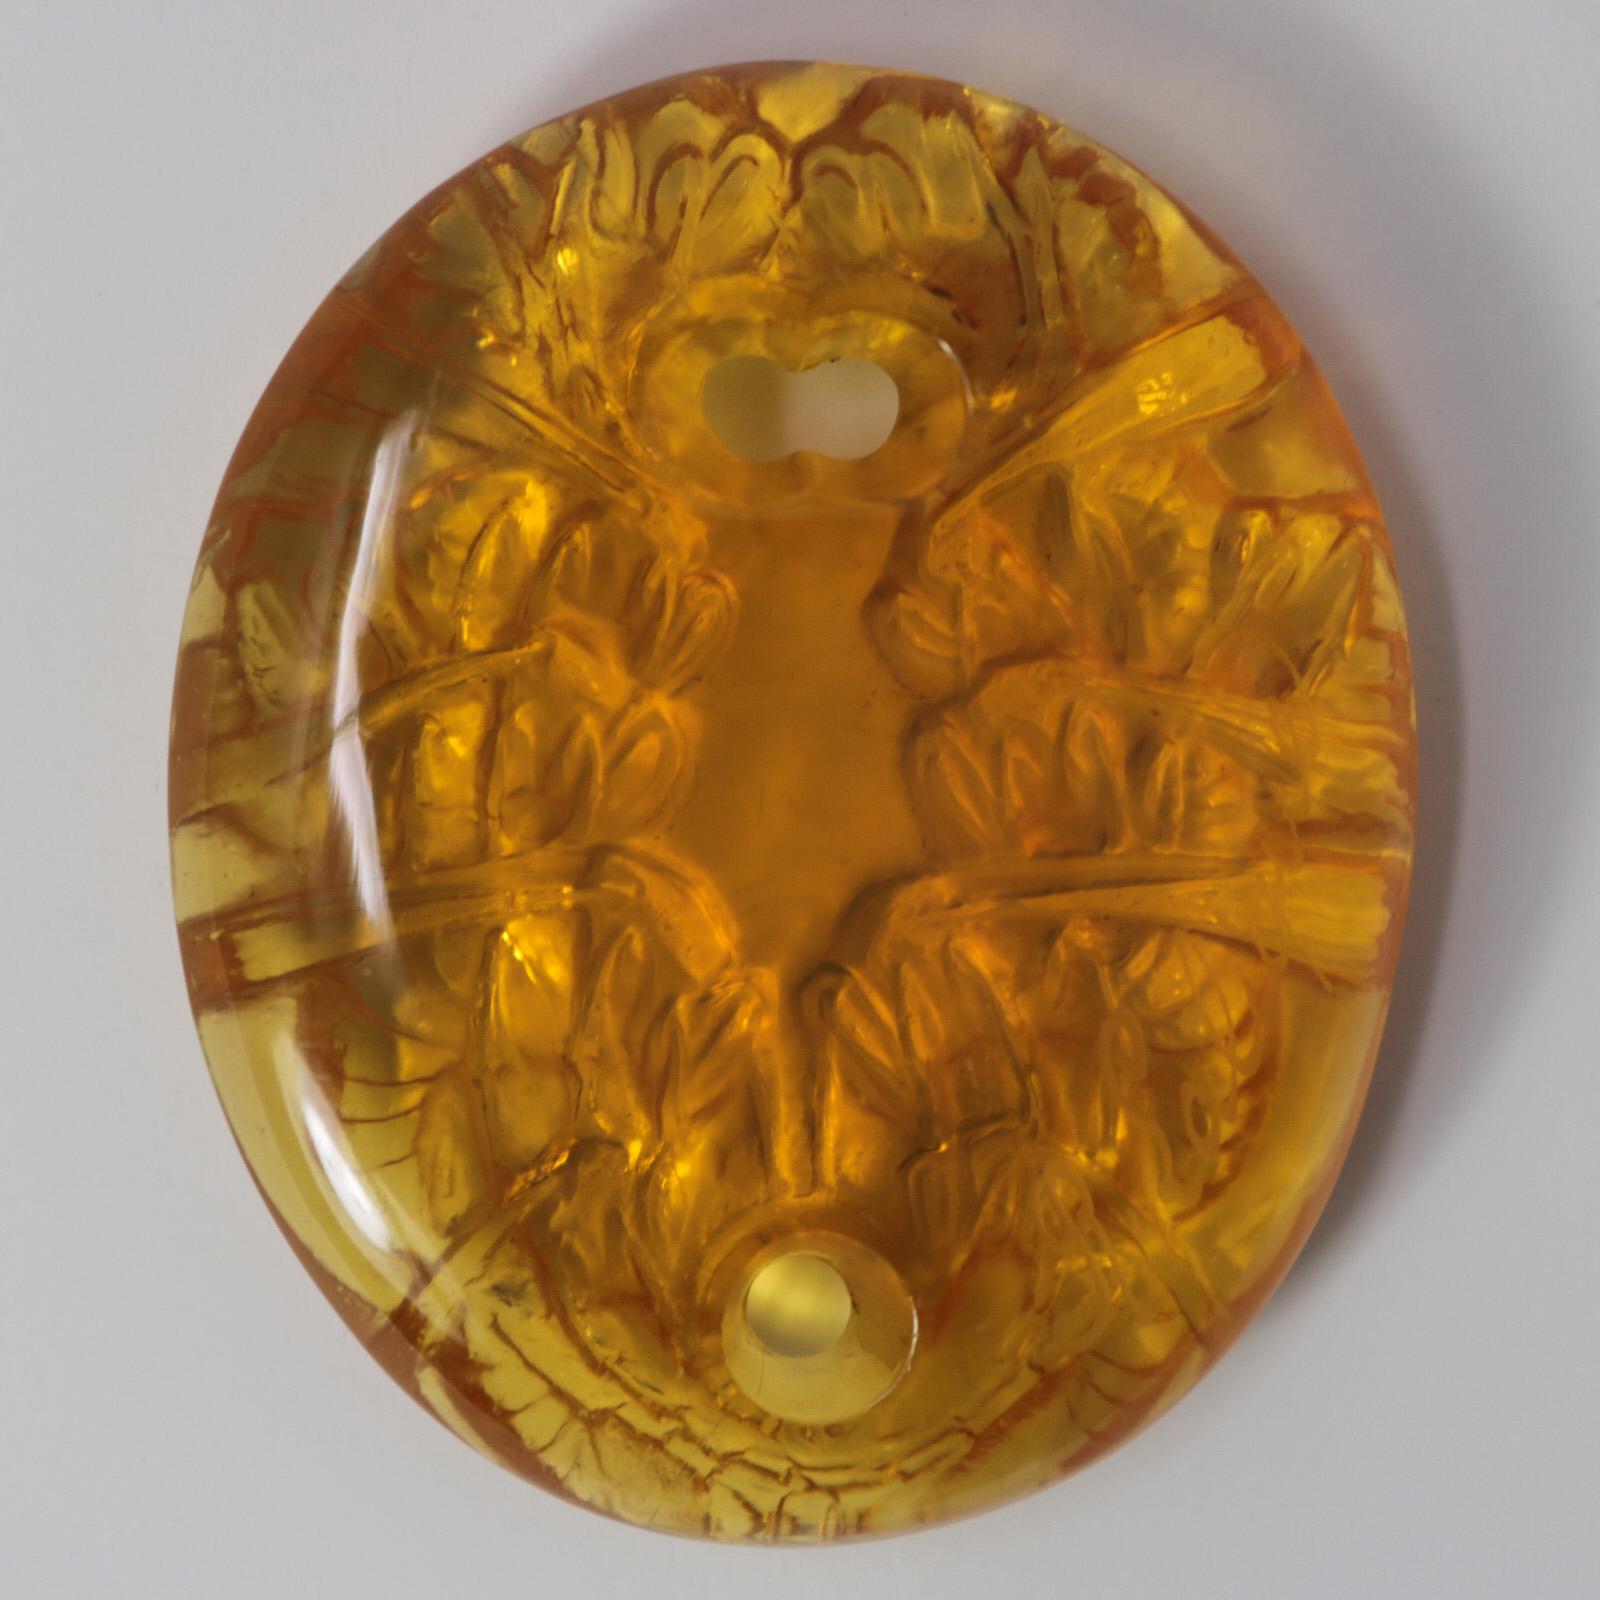 Rene Lalique Amber Glass 'Guepes' Pendant. This pattern features wasps. Engraved makers mark, 'R. Lalique'. Book reference: Marcilhac 1650.